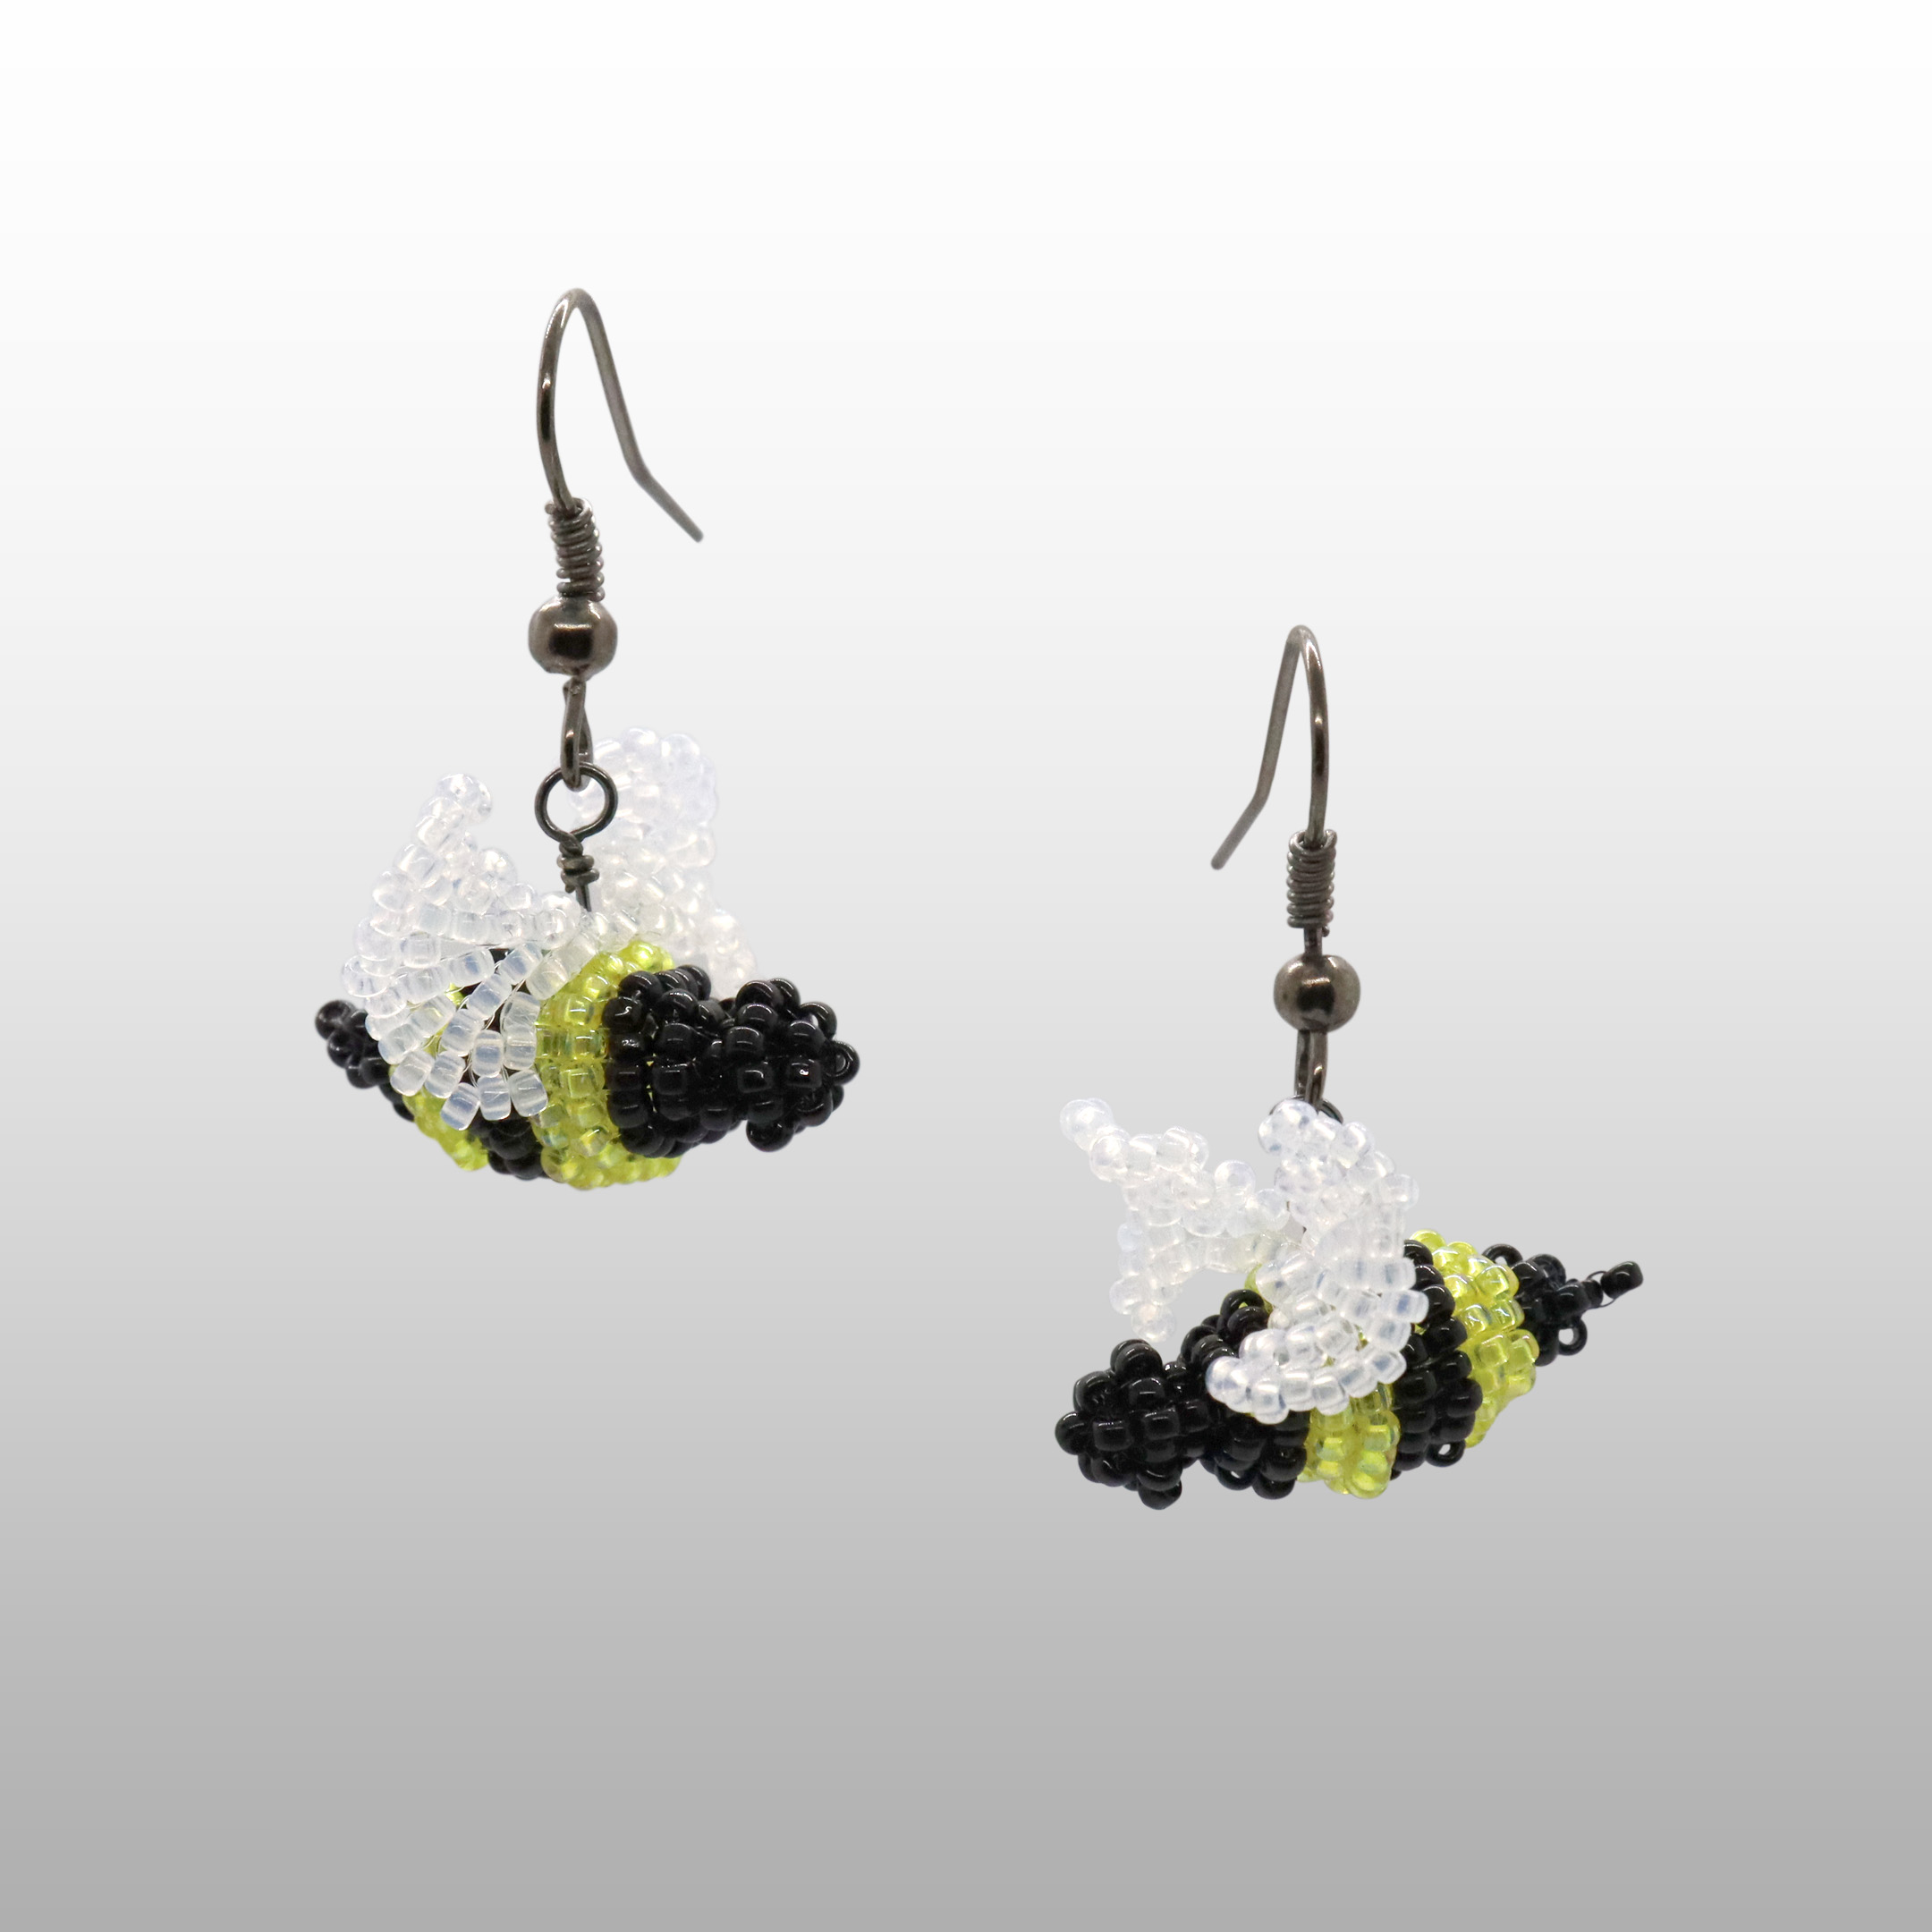 PSB_Earring_Bees-20240251